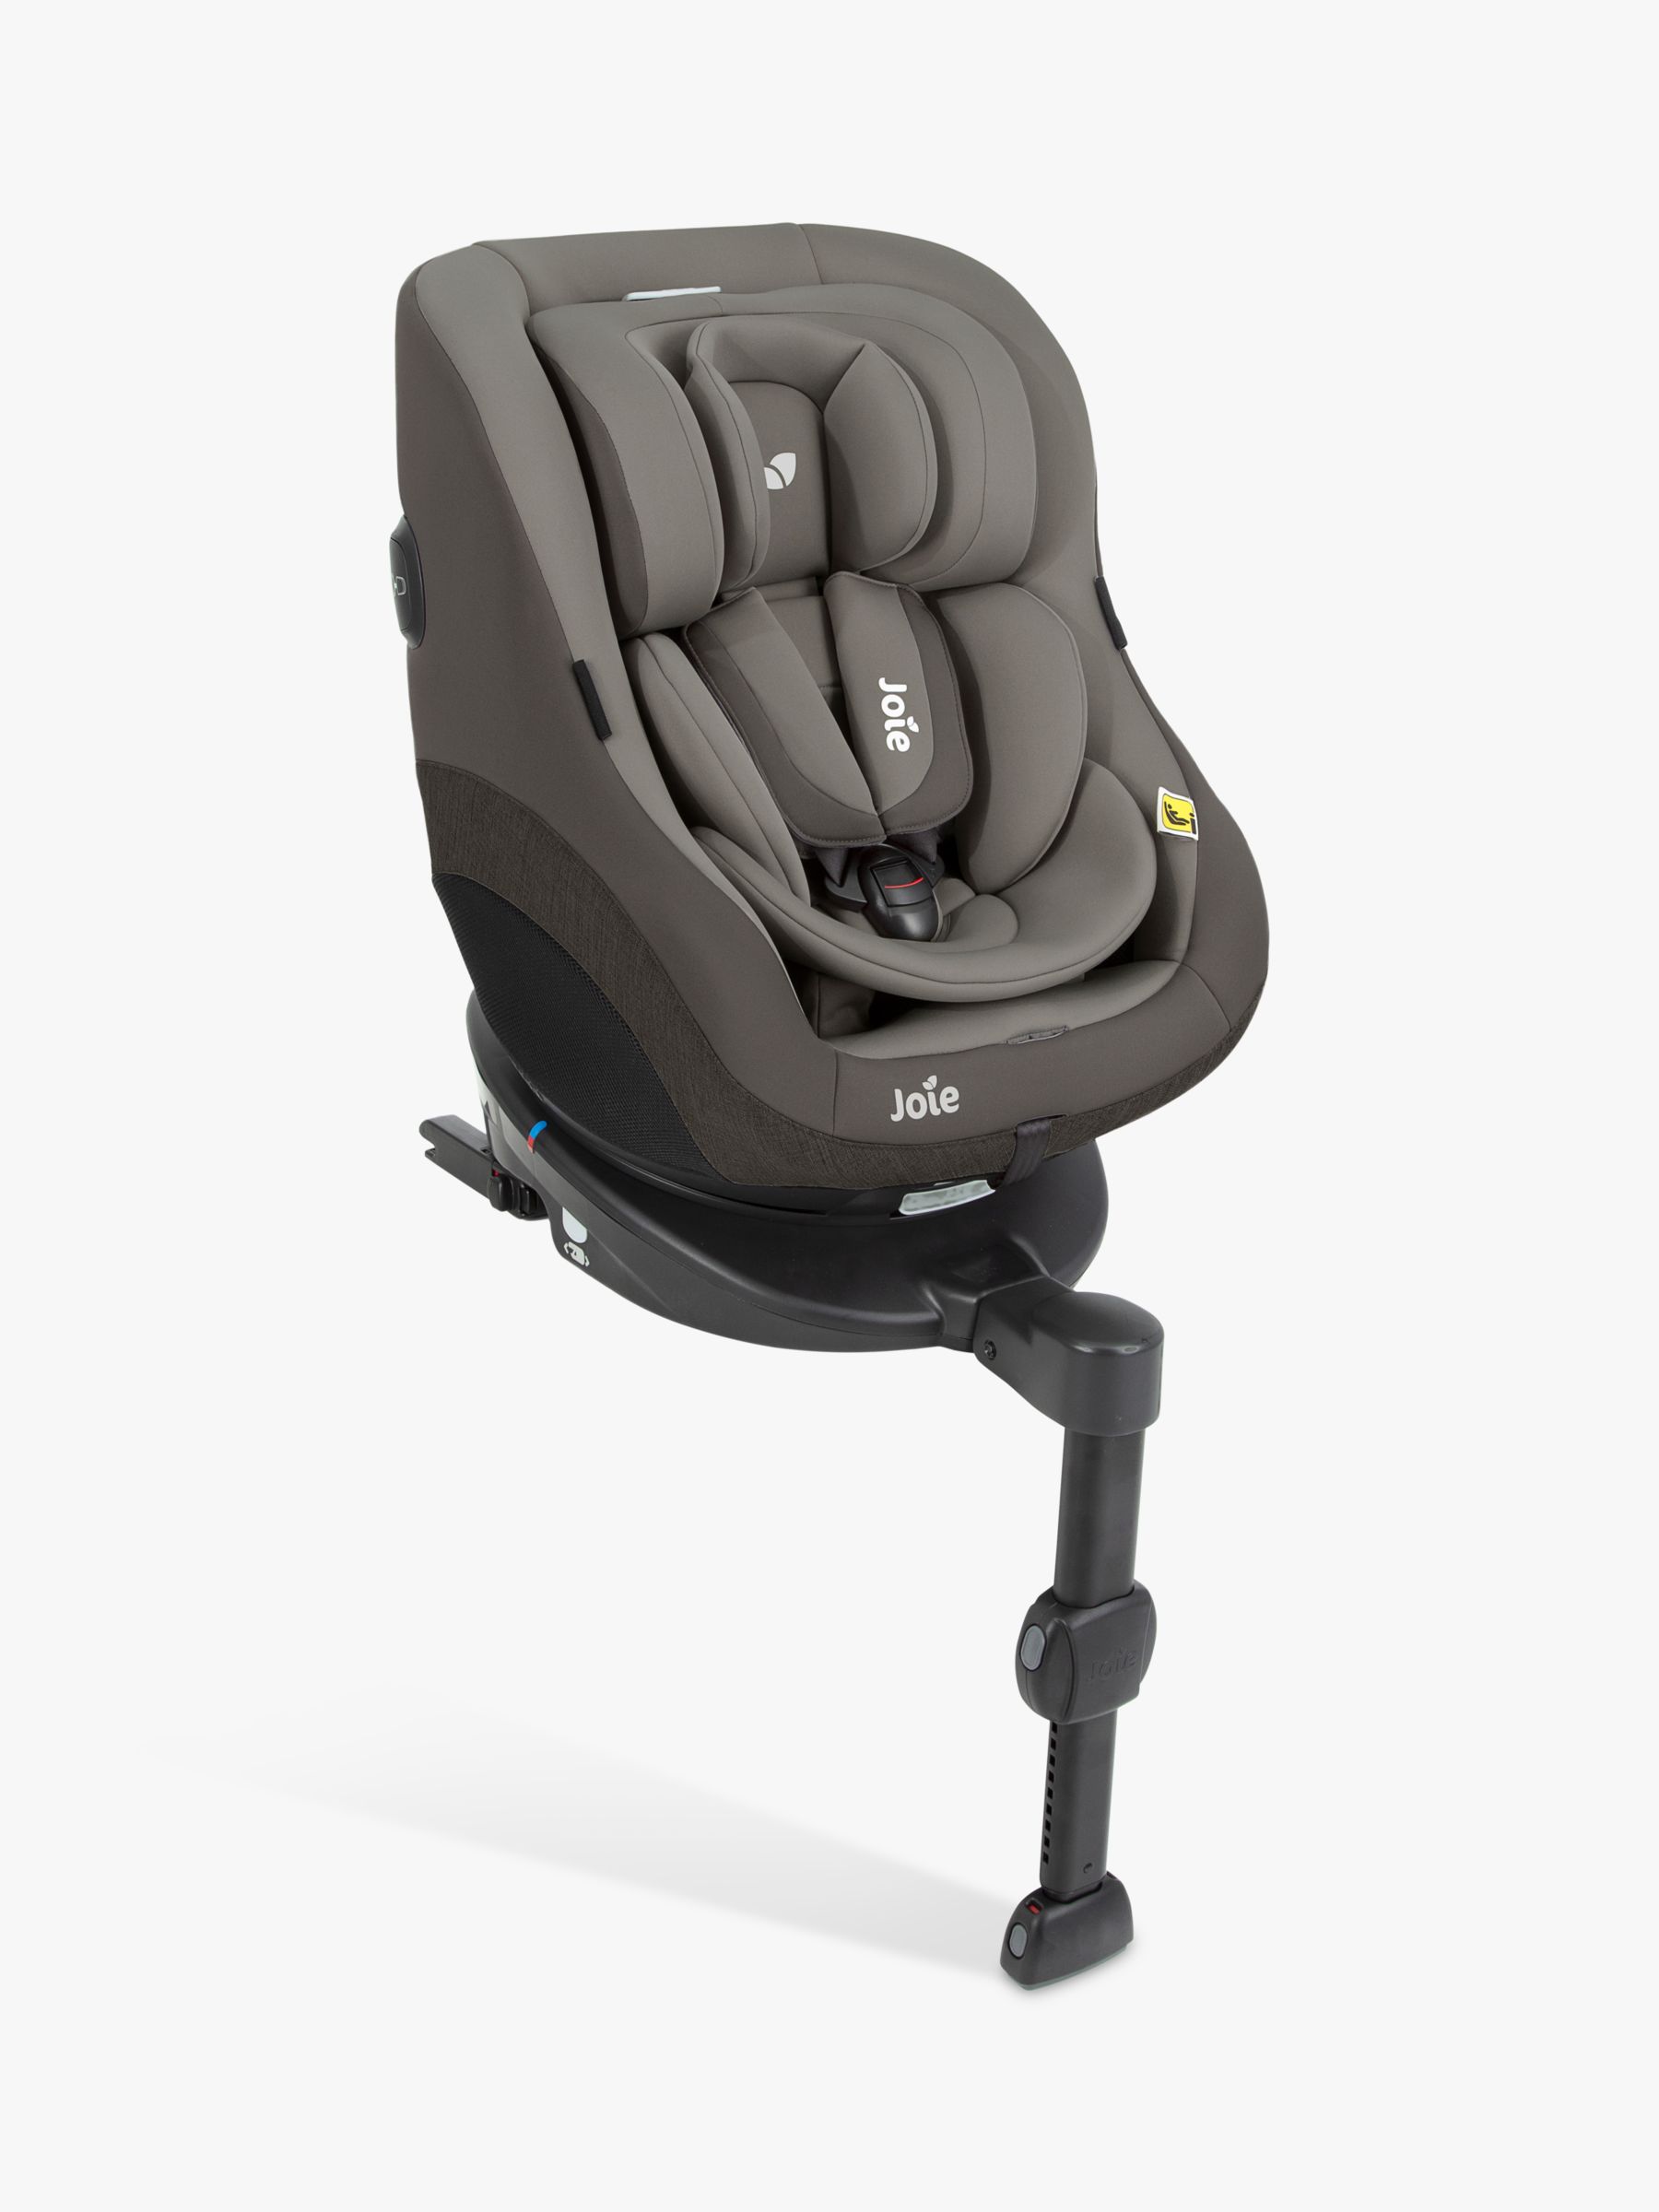 The Car Seat to go the Distance: Maxi-Cosi Titan Pro - She Might Be